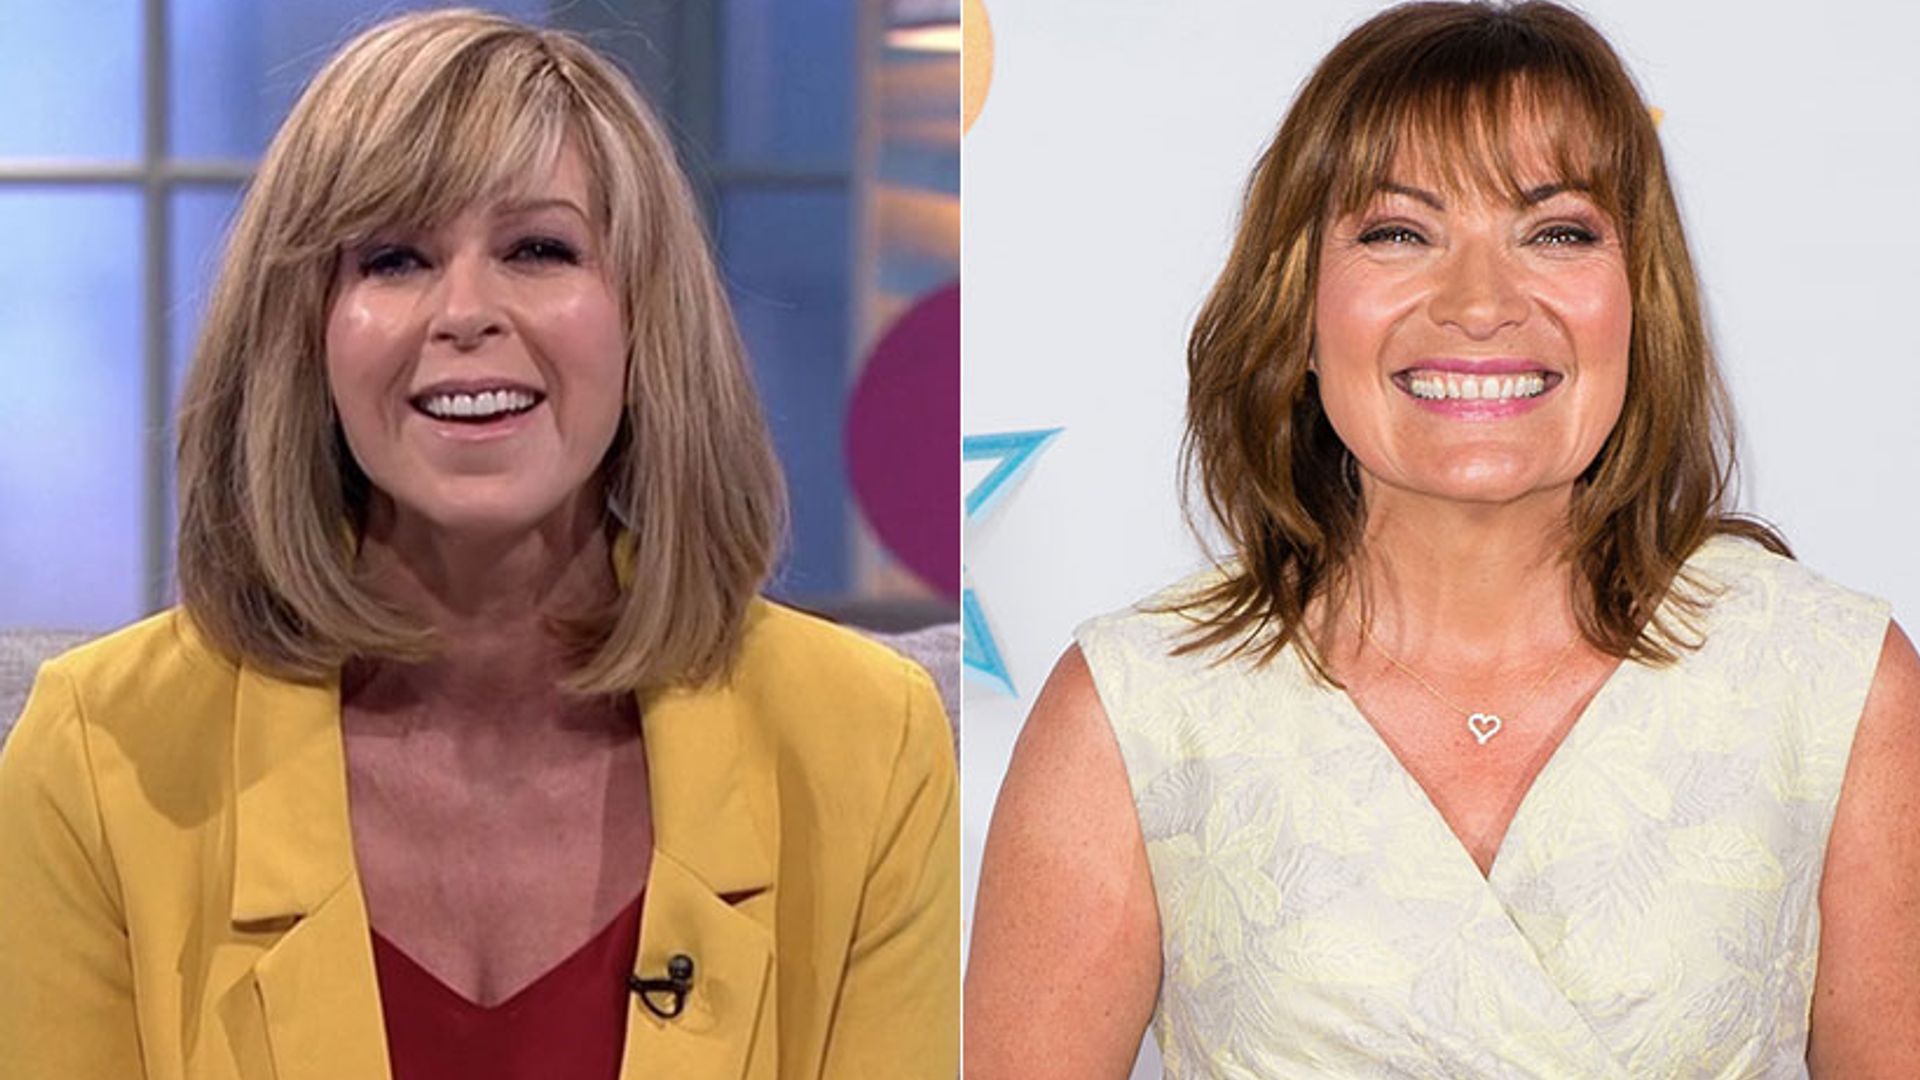 Kate Garraway steps in last minute after Lorraine Kelly calls in sick for her show